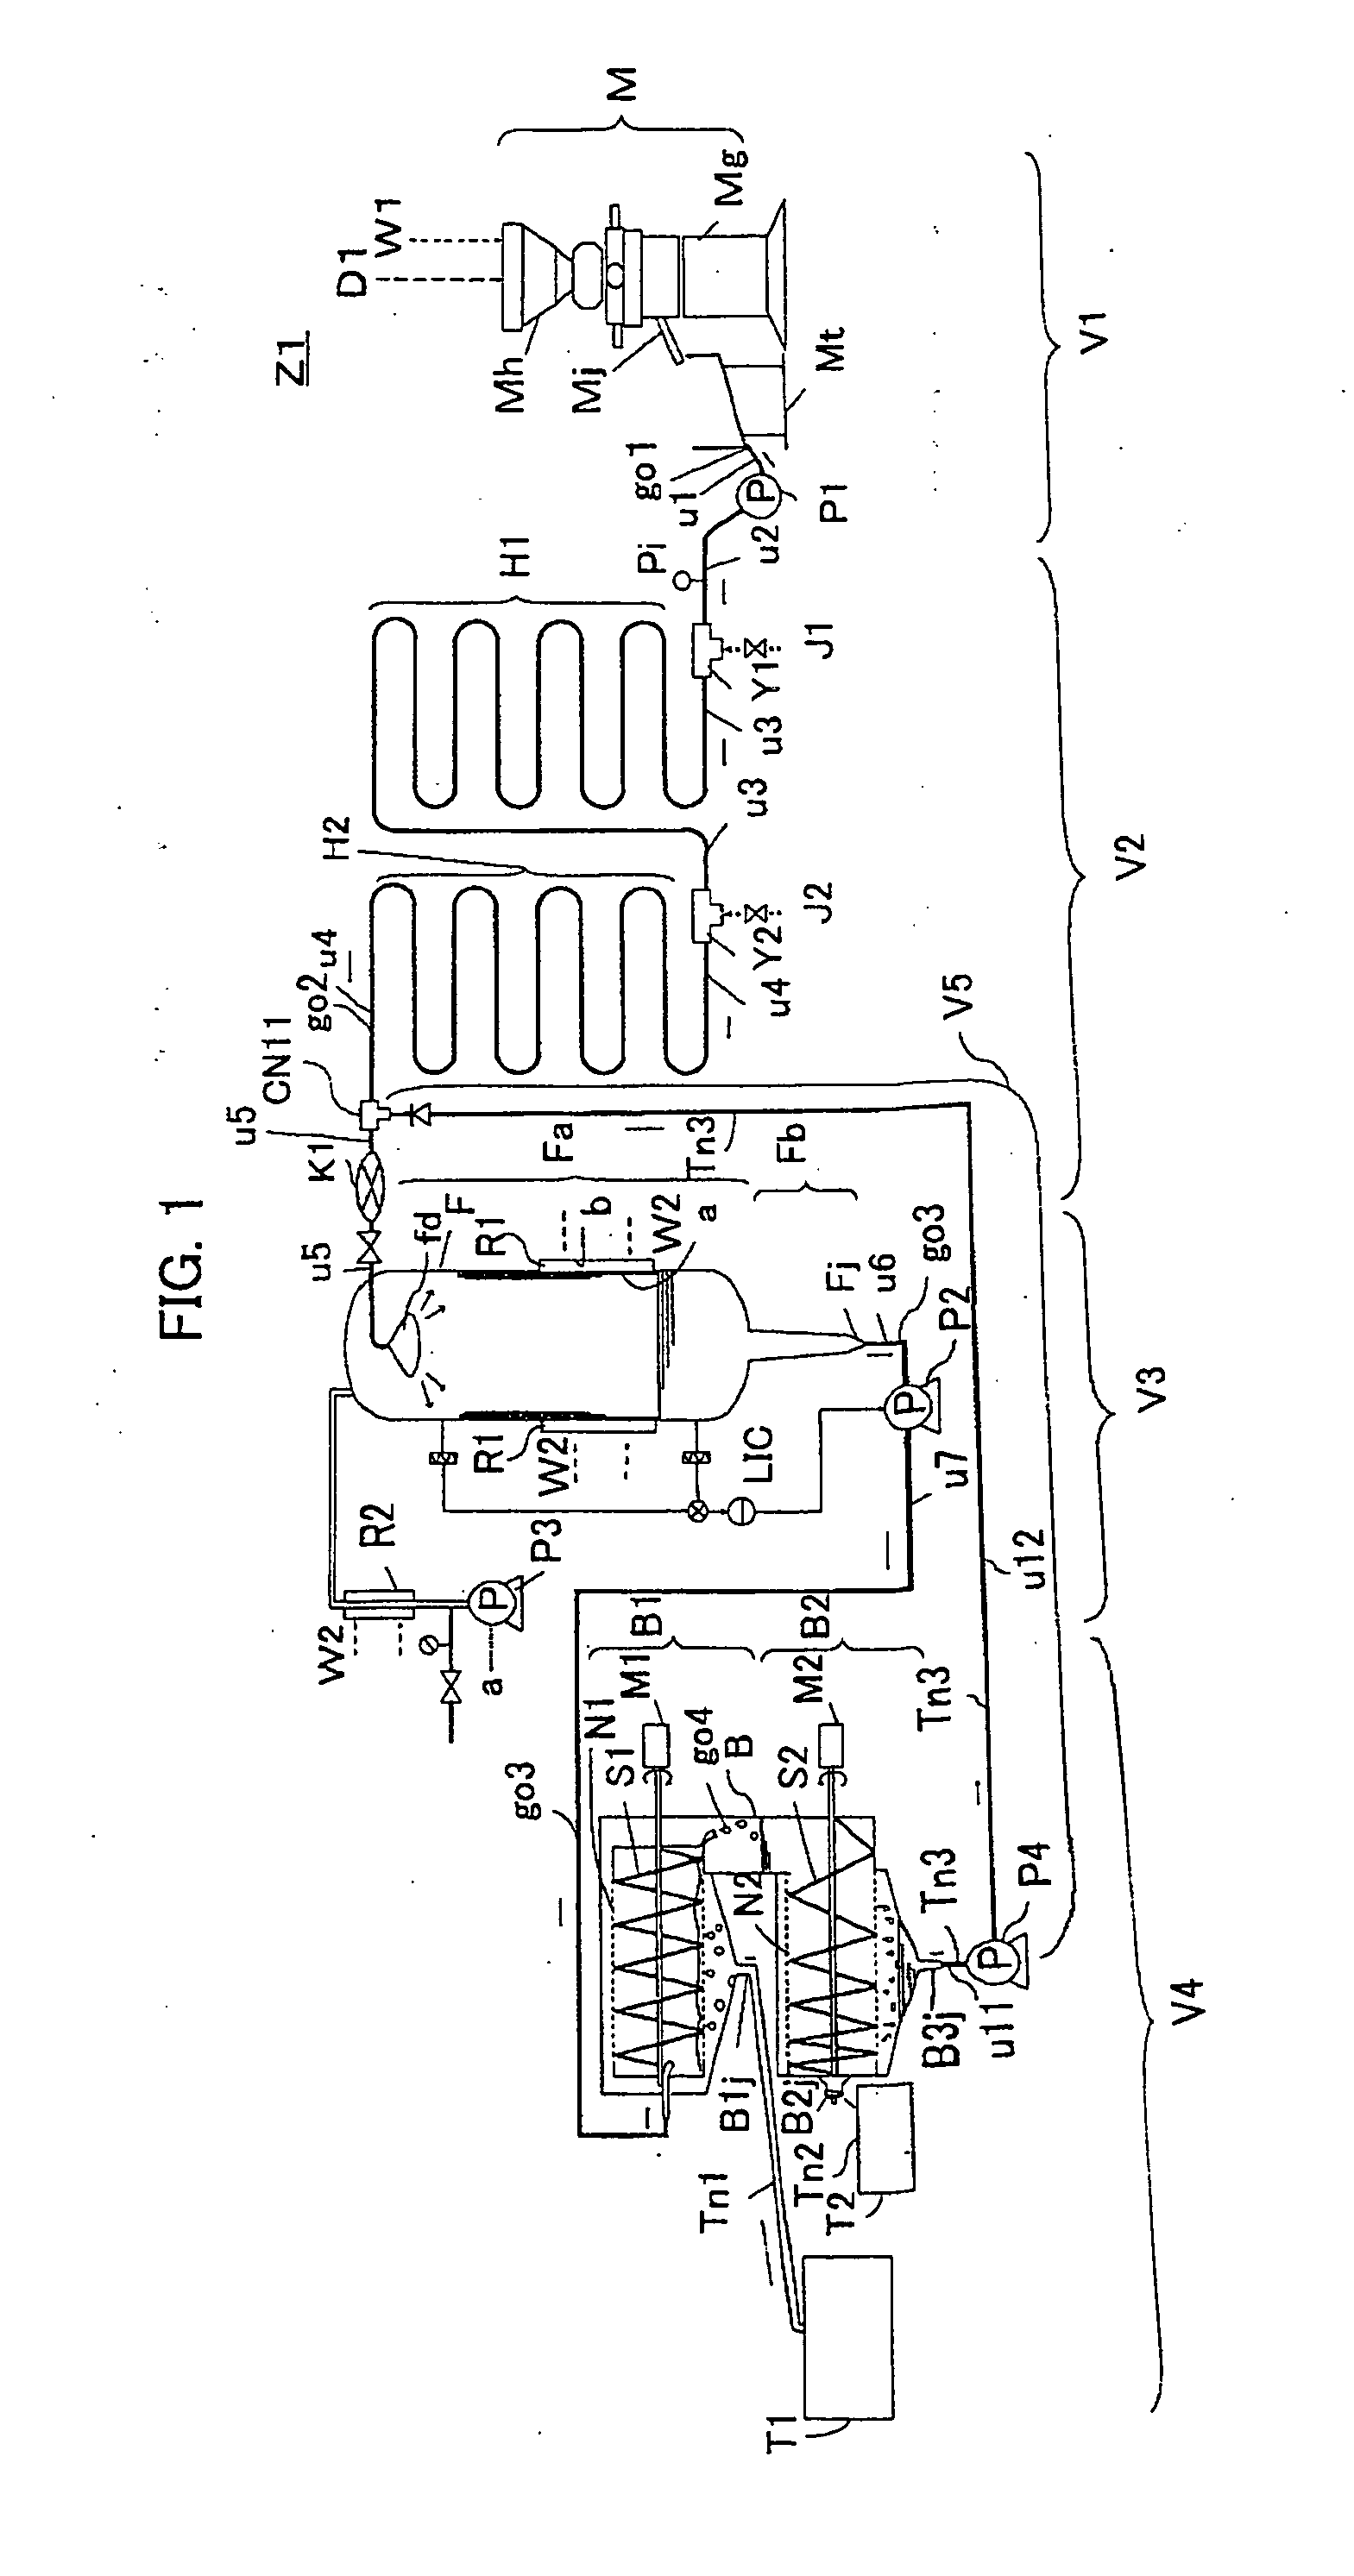 Process for producing soymilk and apparatus for producing soymilk